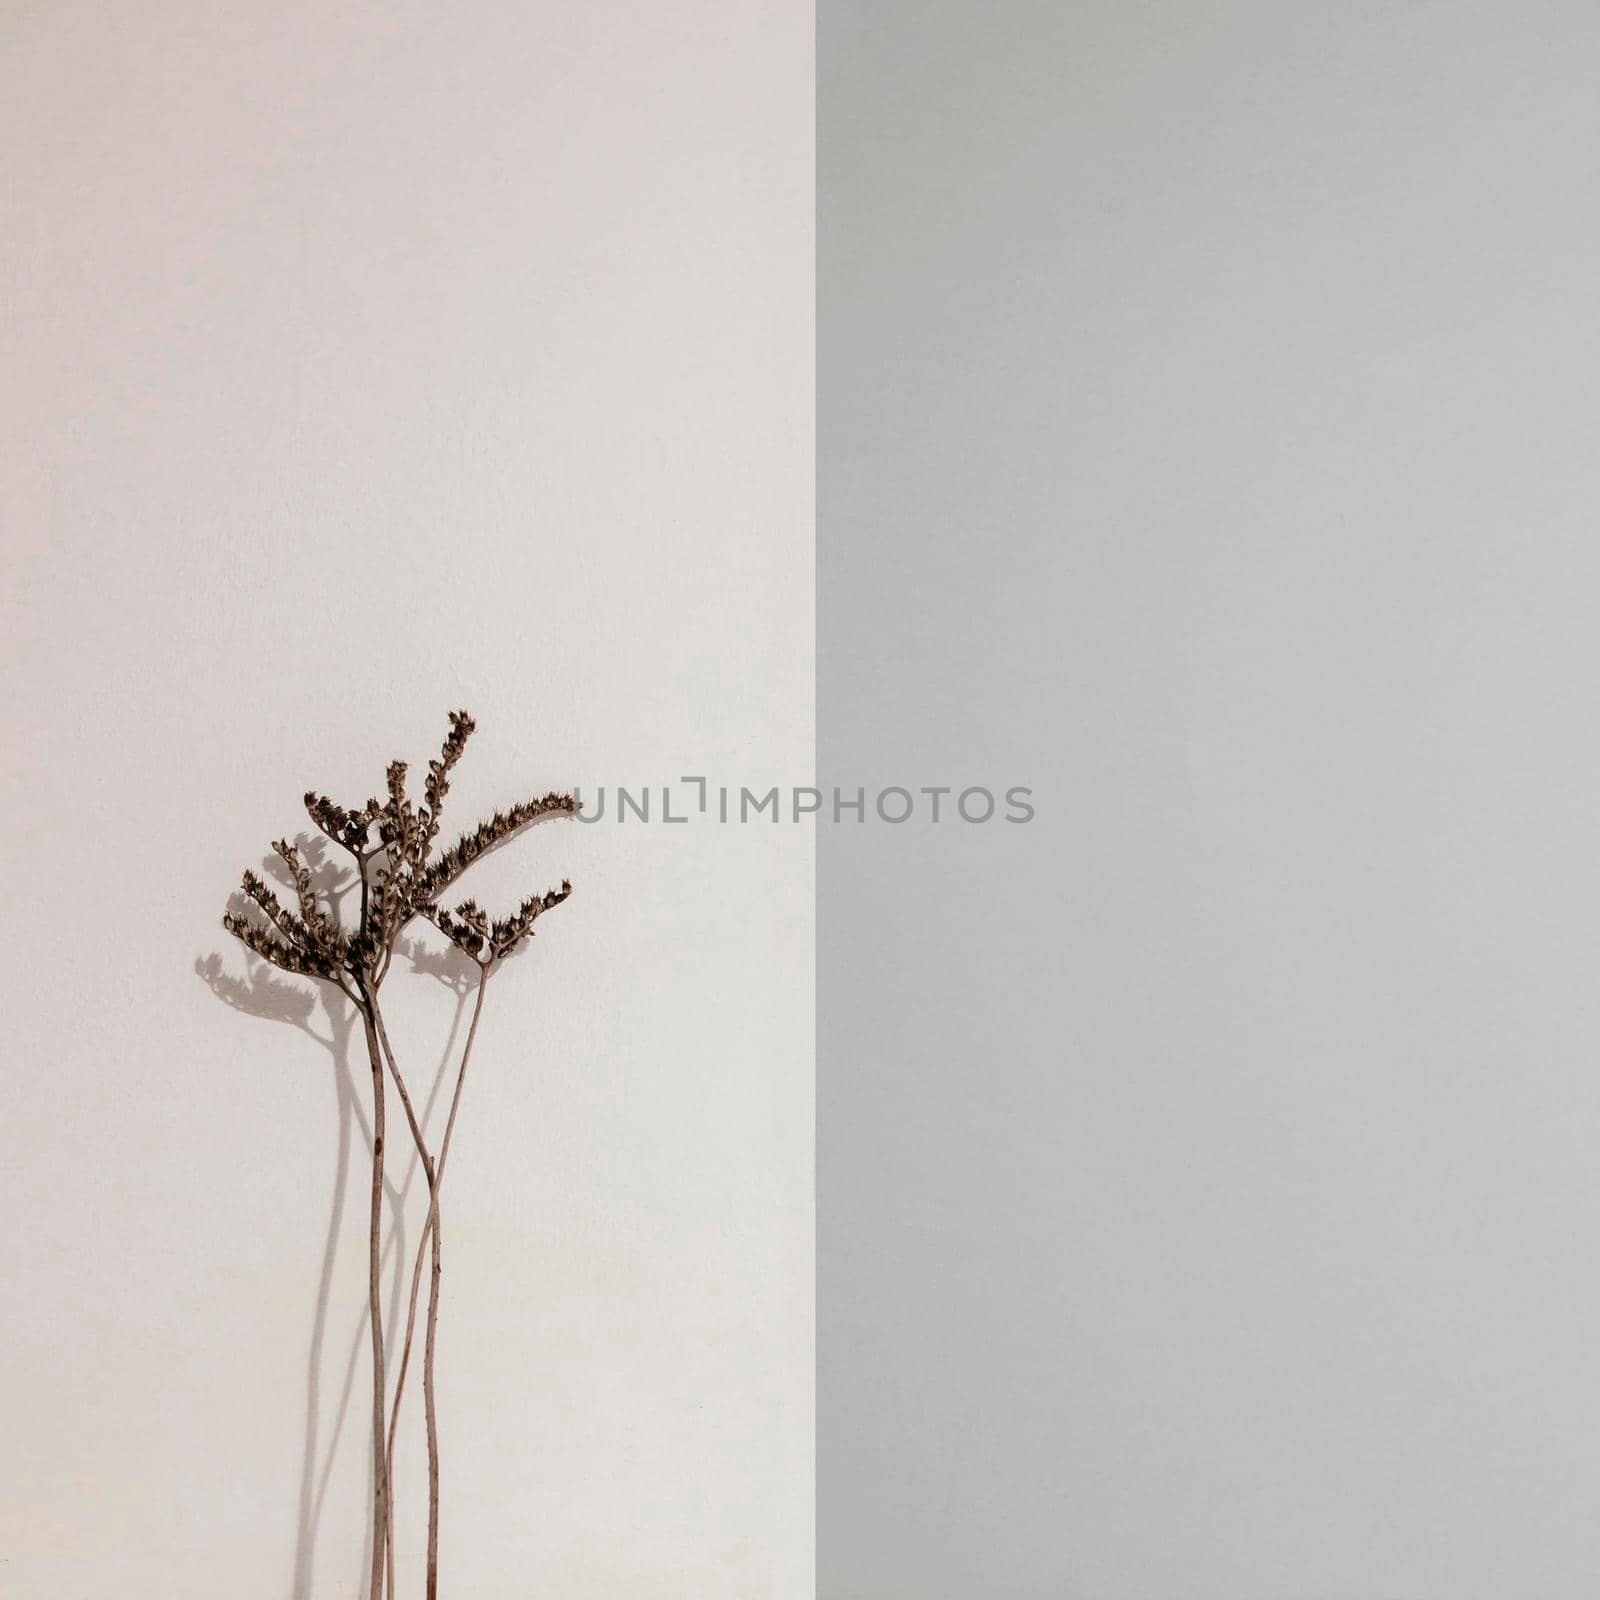 abstract minimal plant leaning wall front view. High quality photo by Zahard